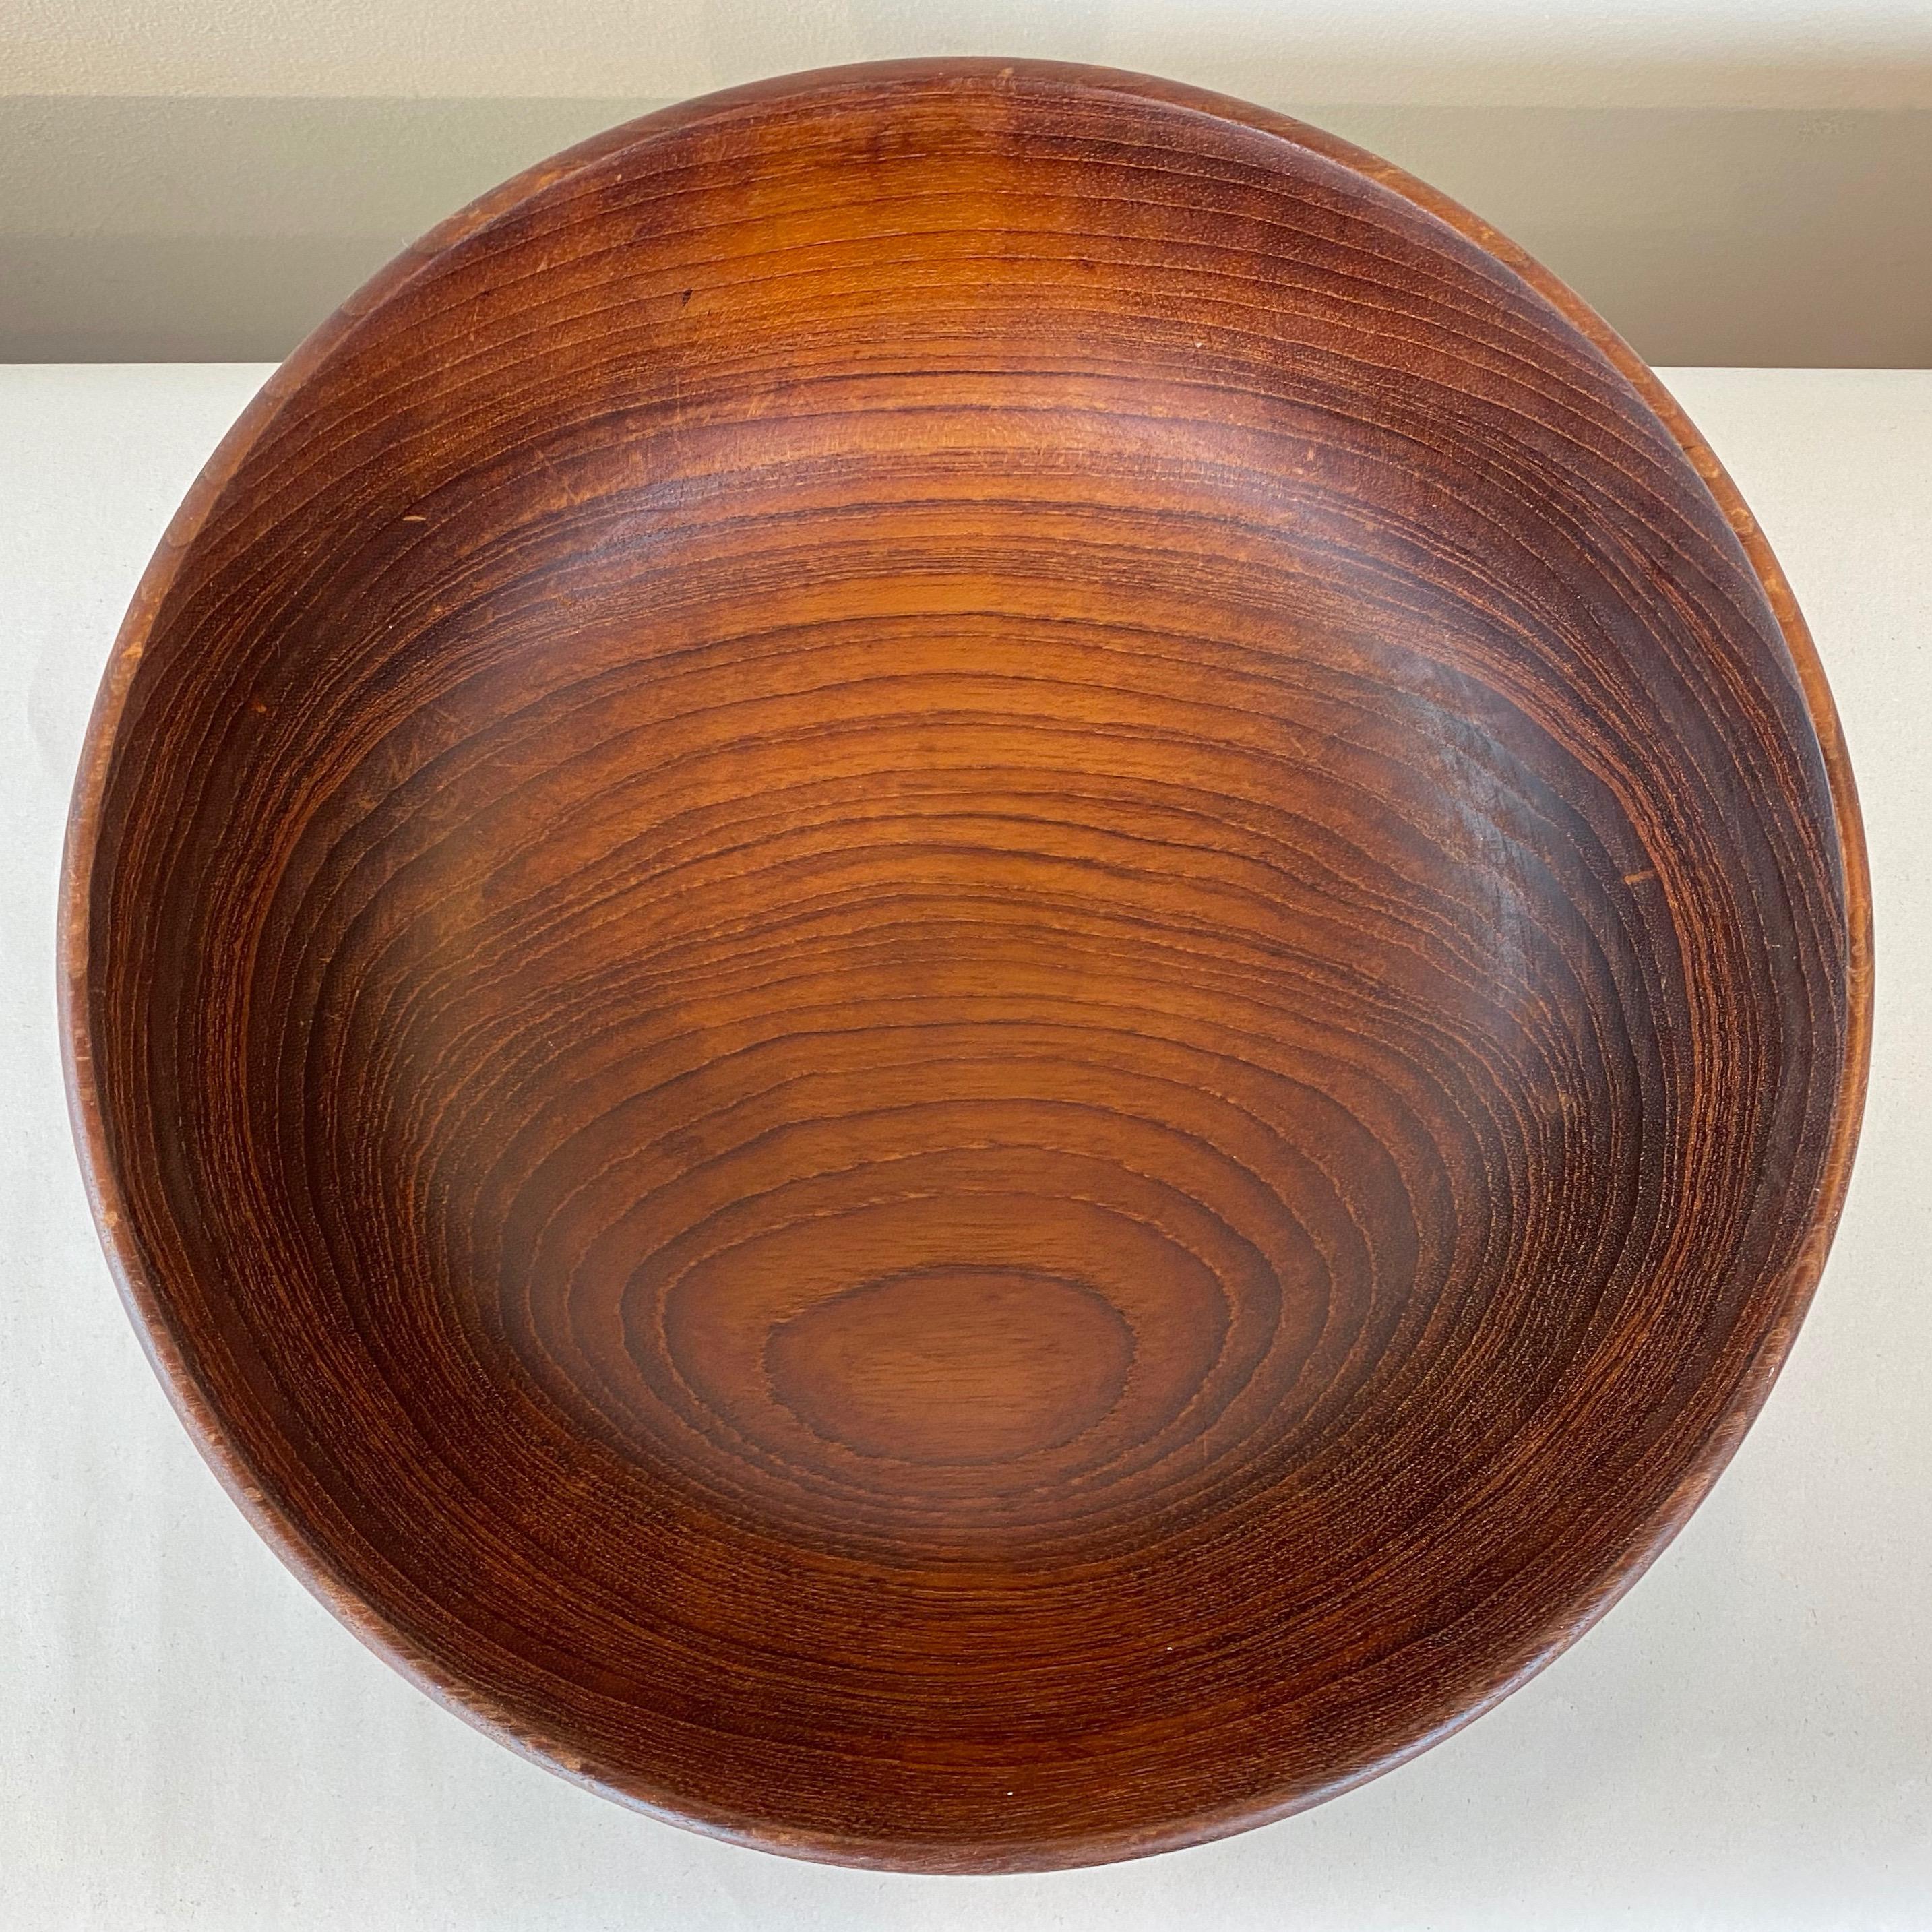 Bob Stocksdale Teak Turned Wood Bowl with Exceptional Grain Pattern, Early 1970s For Sale 5